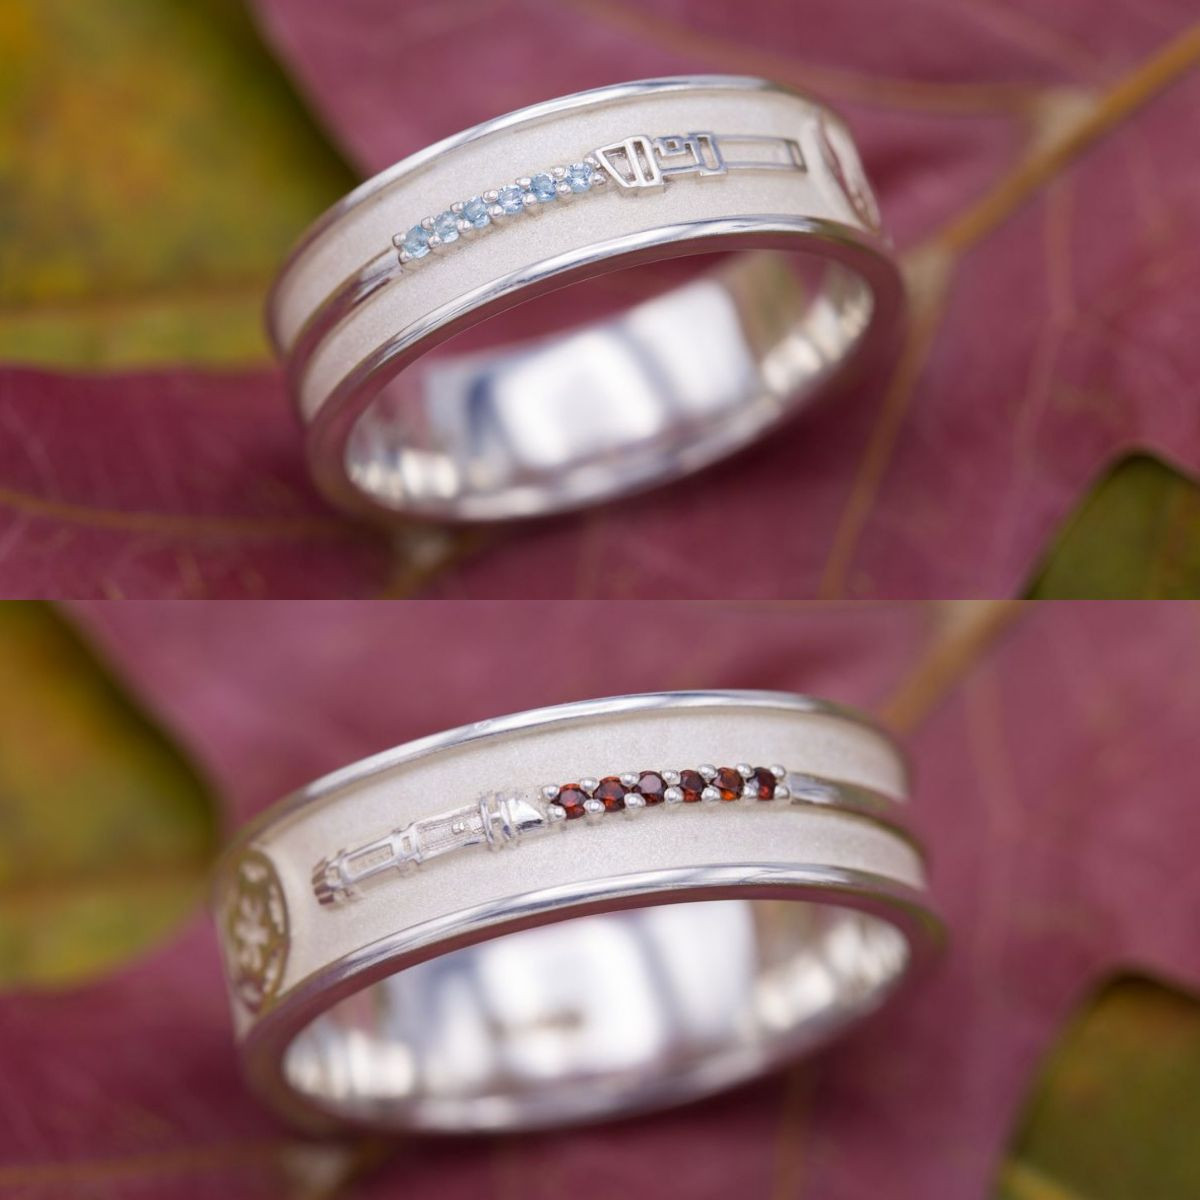 Nerdy Wedding Bands
 Geeky Engagement Rings Nerdy Wedding Bands